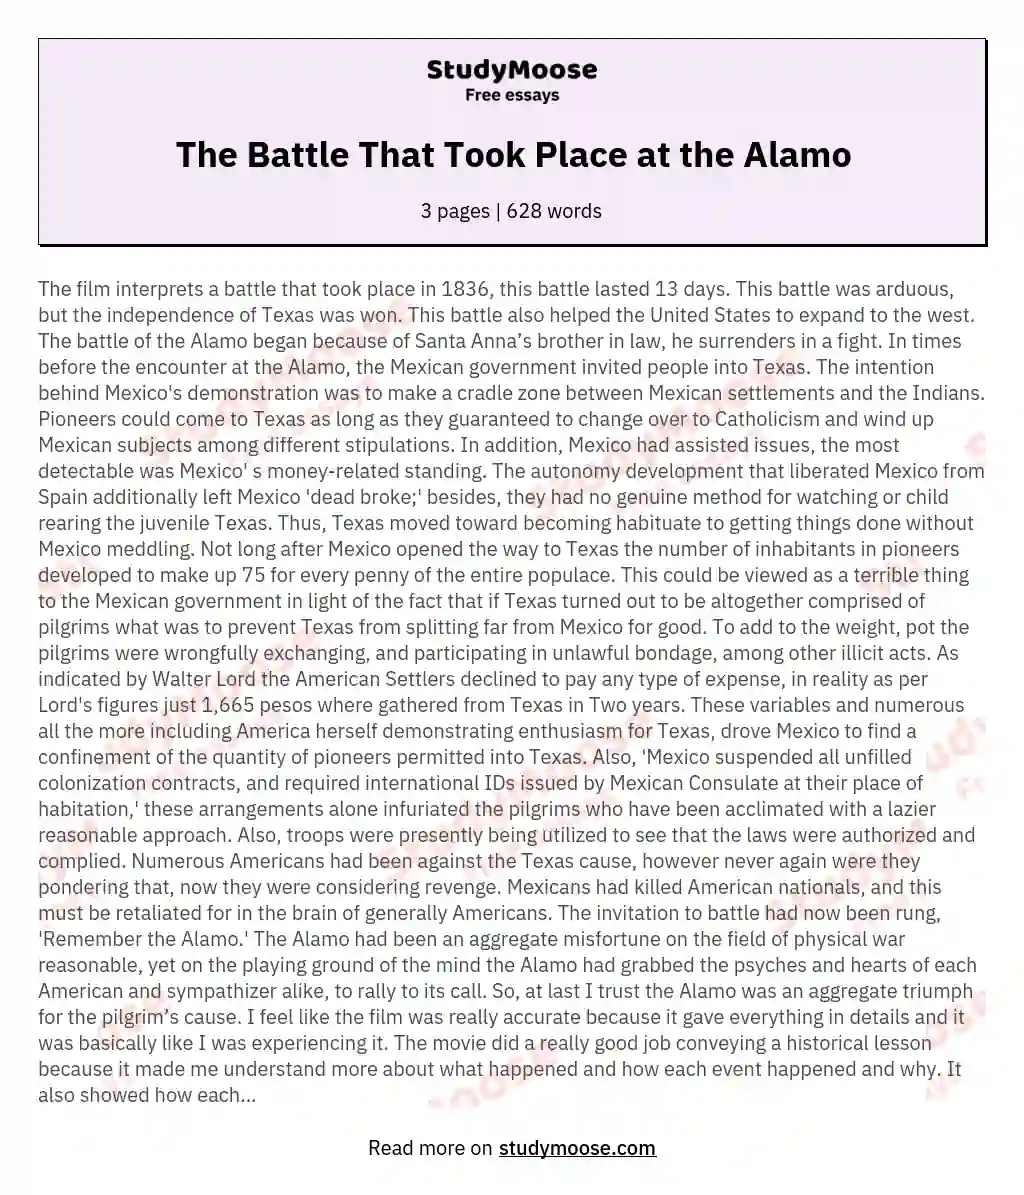 The Battle That Took Place at the Alamo essay